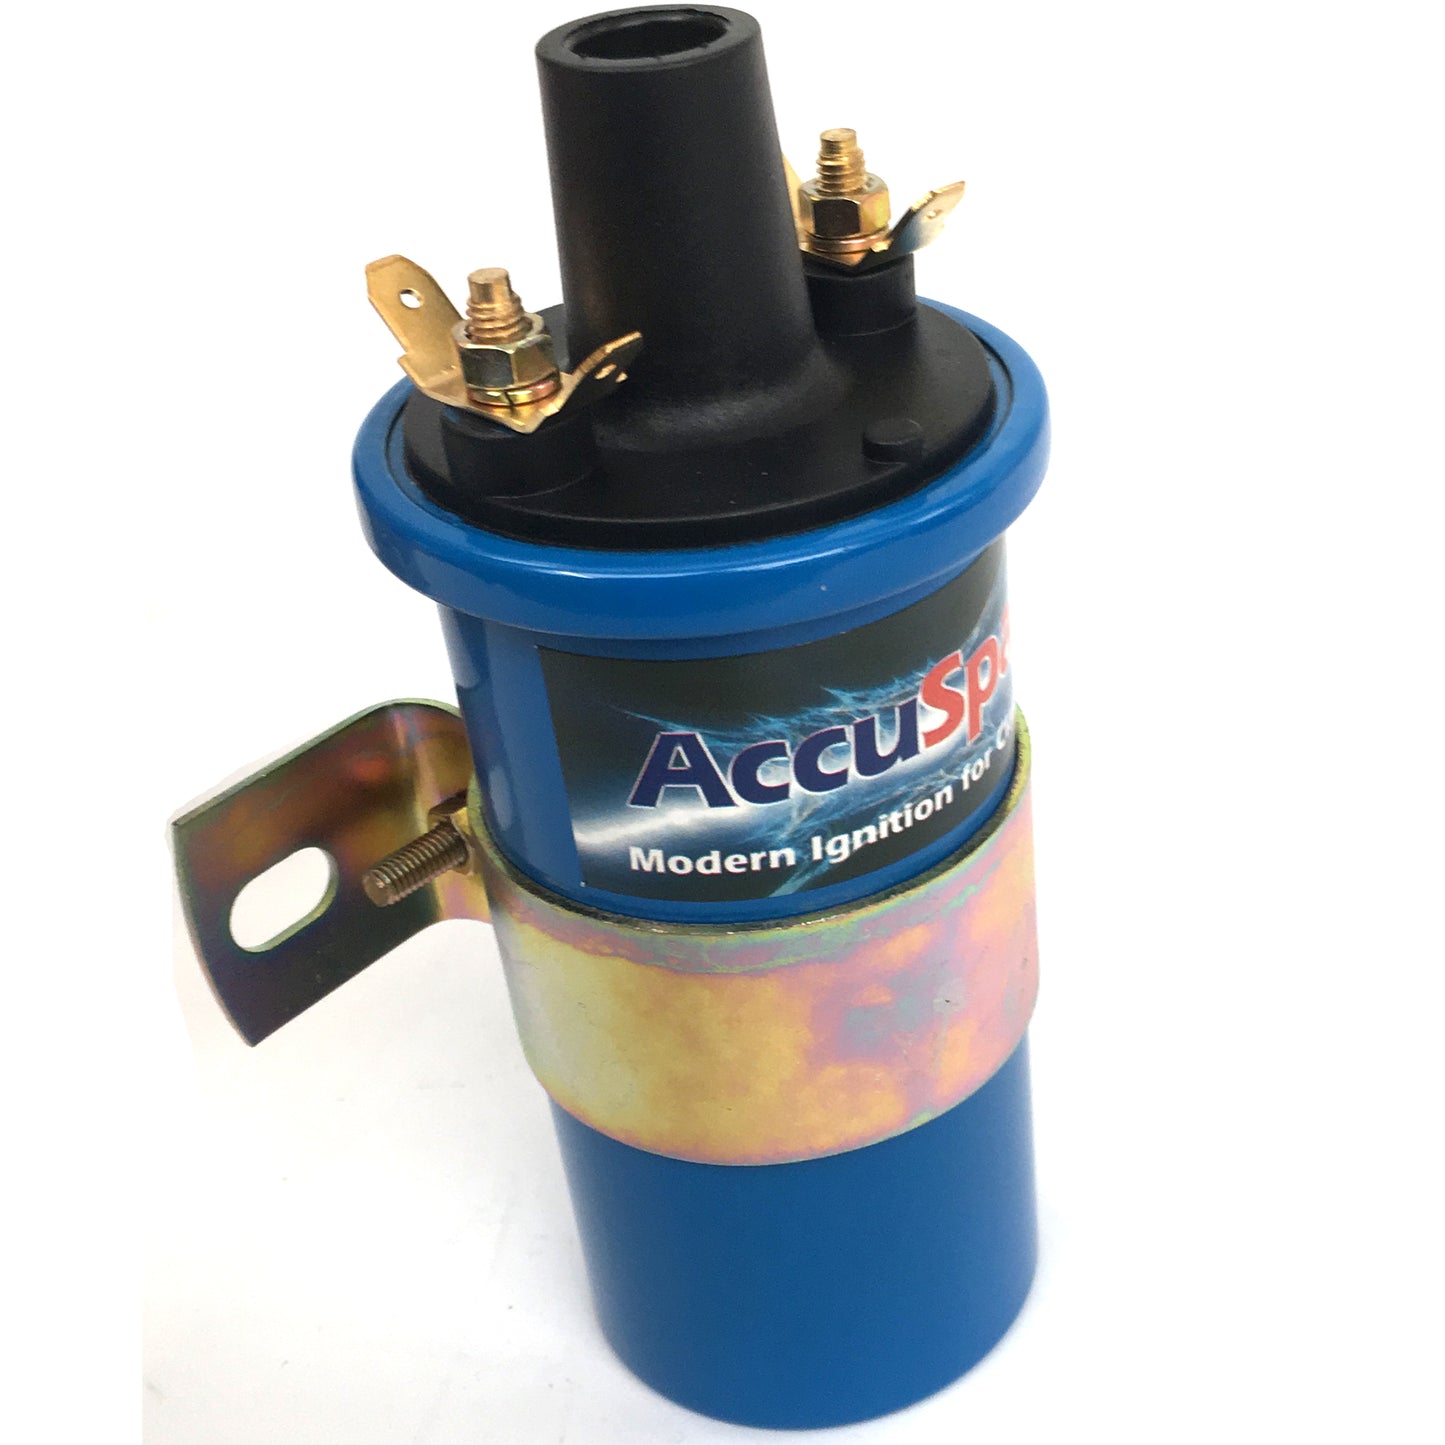 New Accuspark Blue replaces Lucas DLB110, Ballast 1.5 Ohm Sports Ignition Coil…